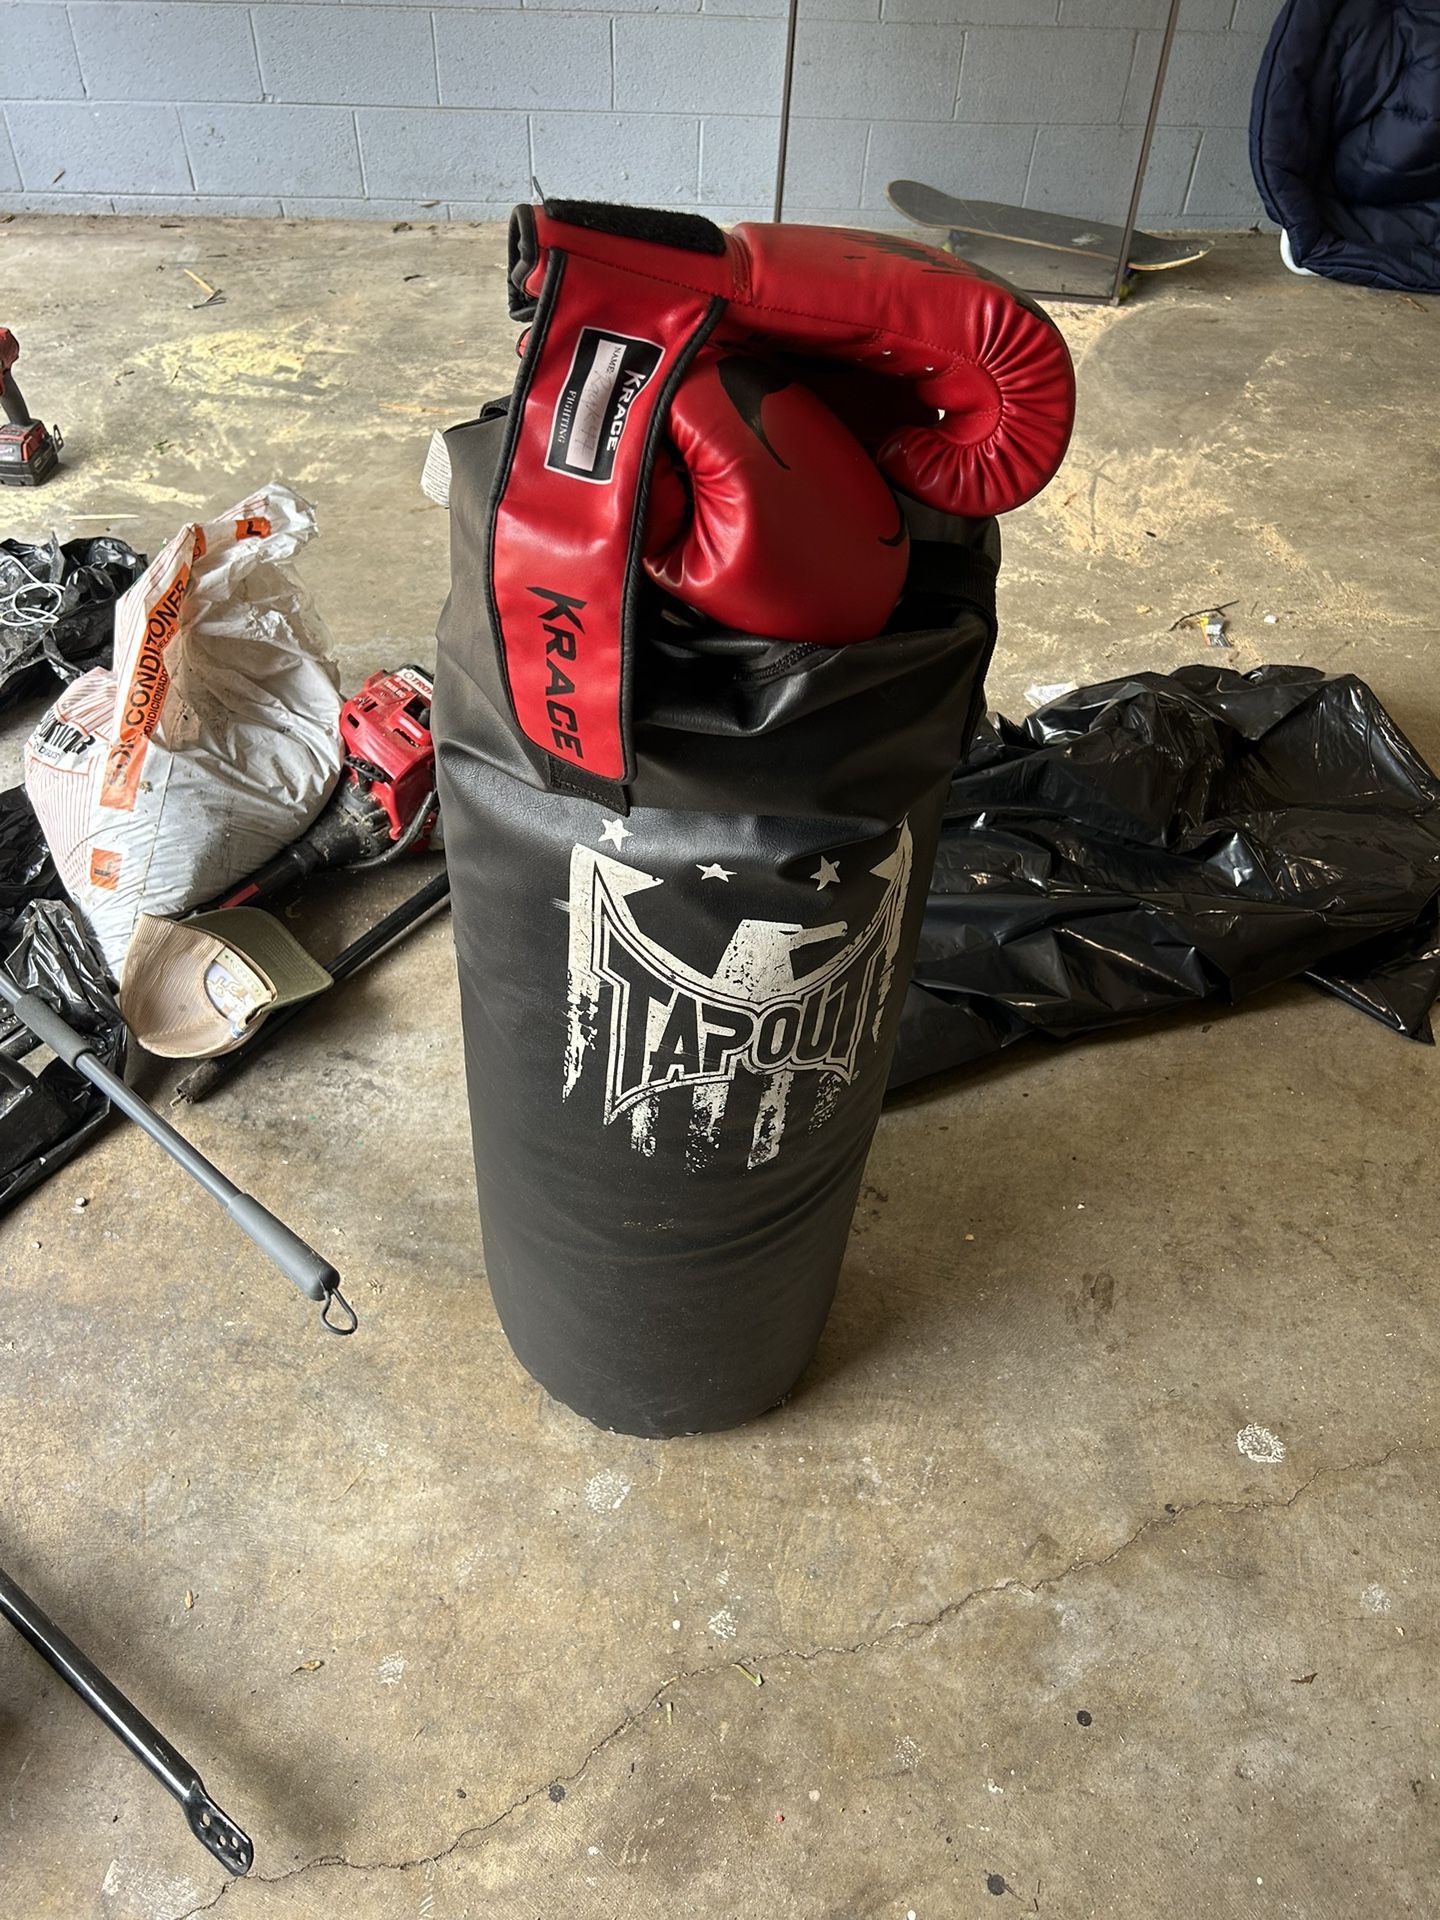 Tap Out Punching Bag W/ Gloves Included 